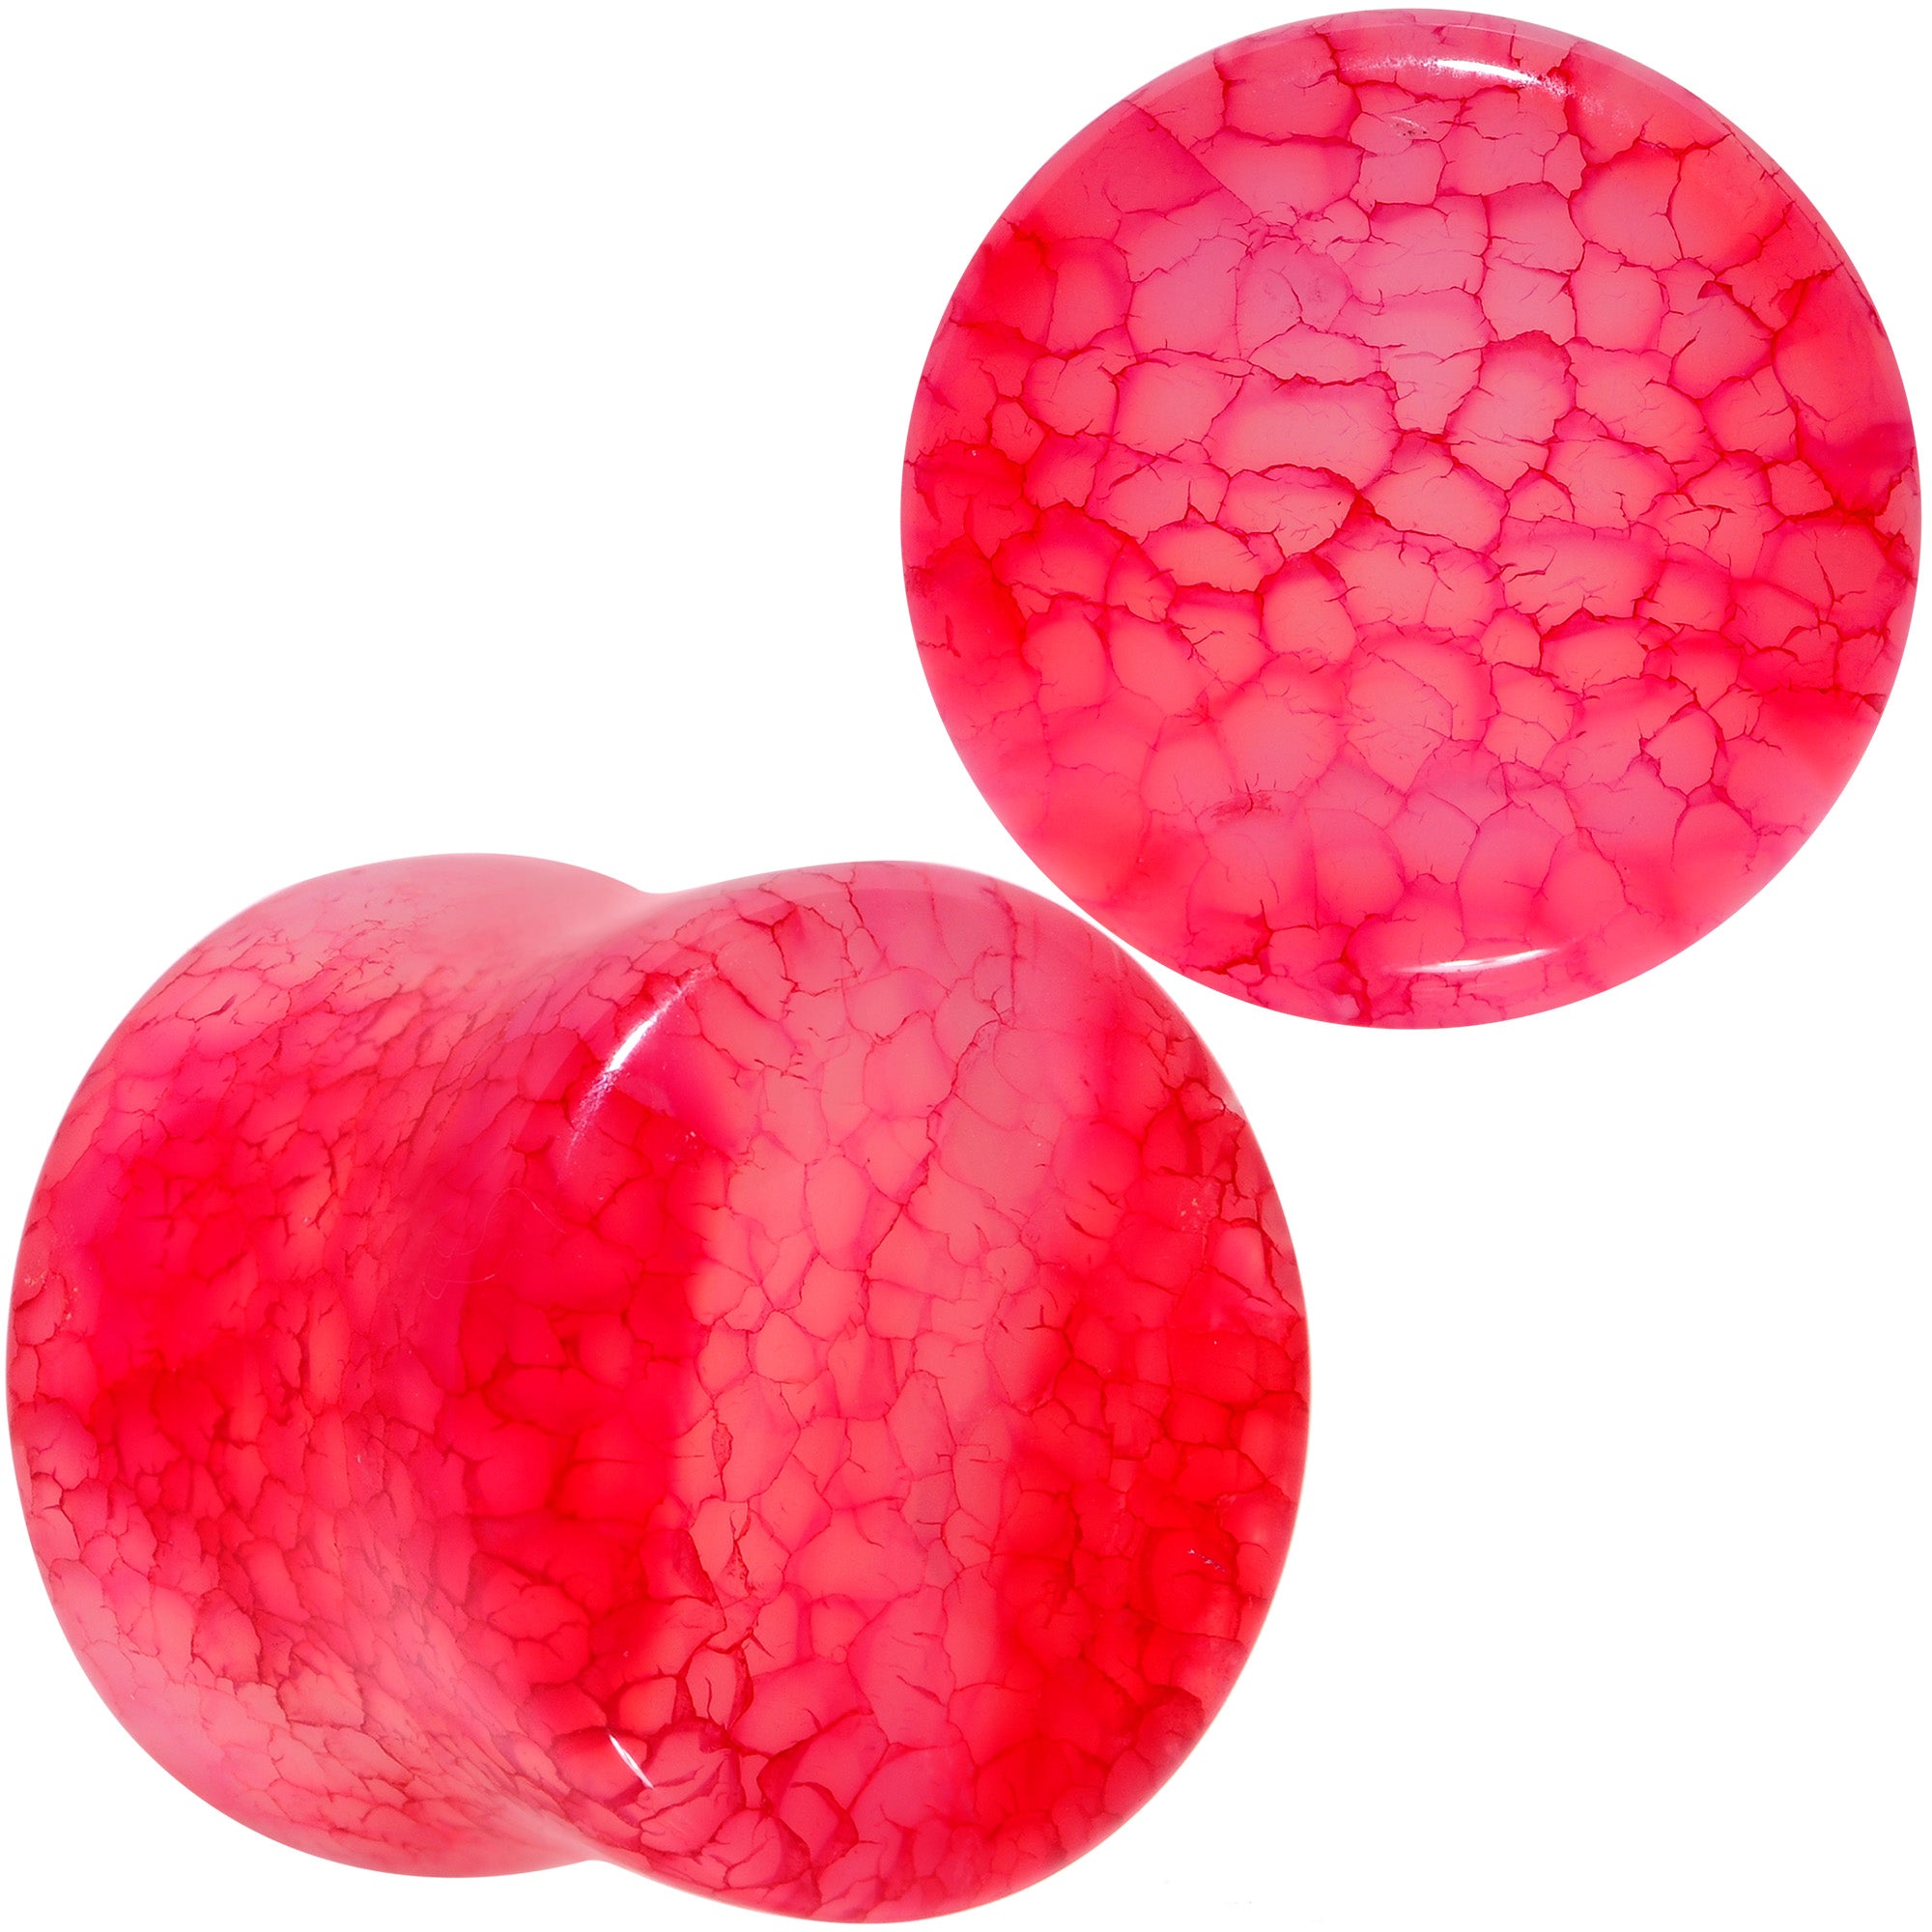 Red Agate Stone Saddle Plug Set Available in Sizes 0 Gauge to 25mm